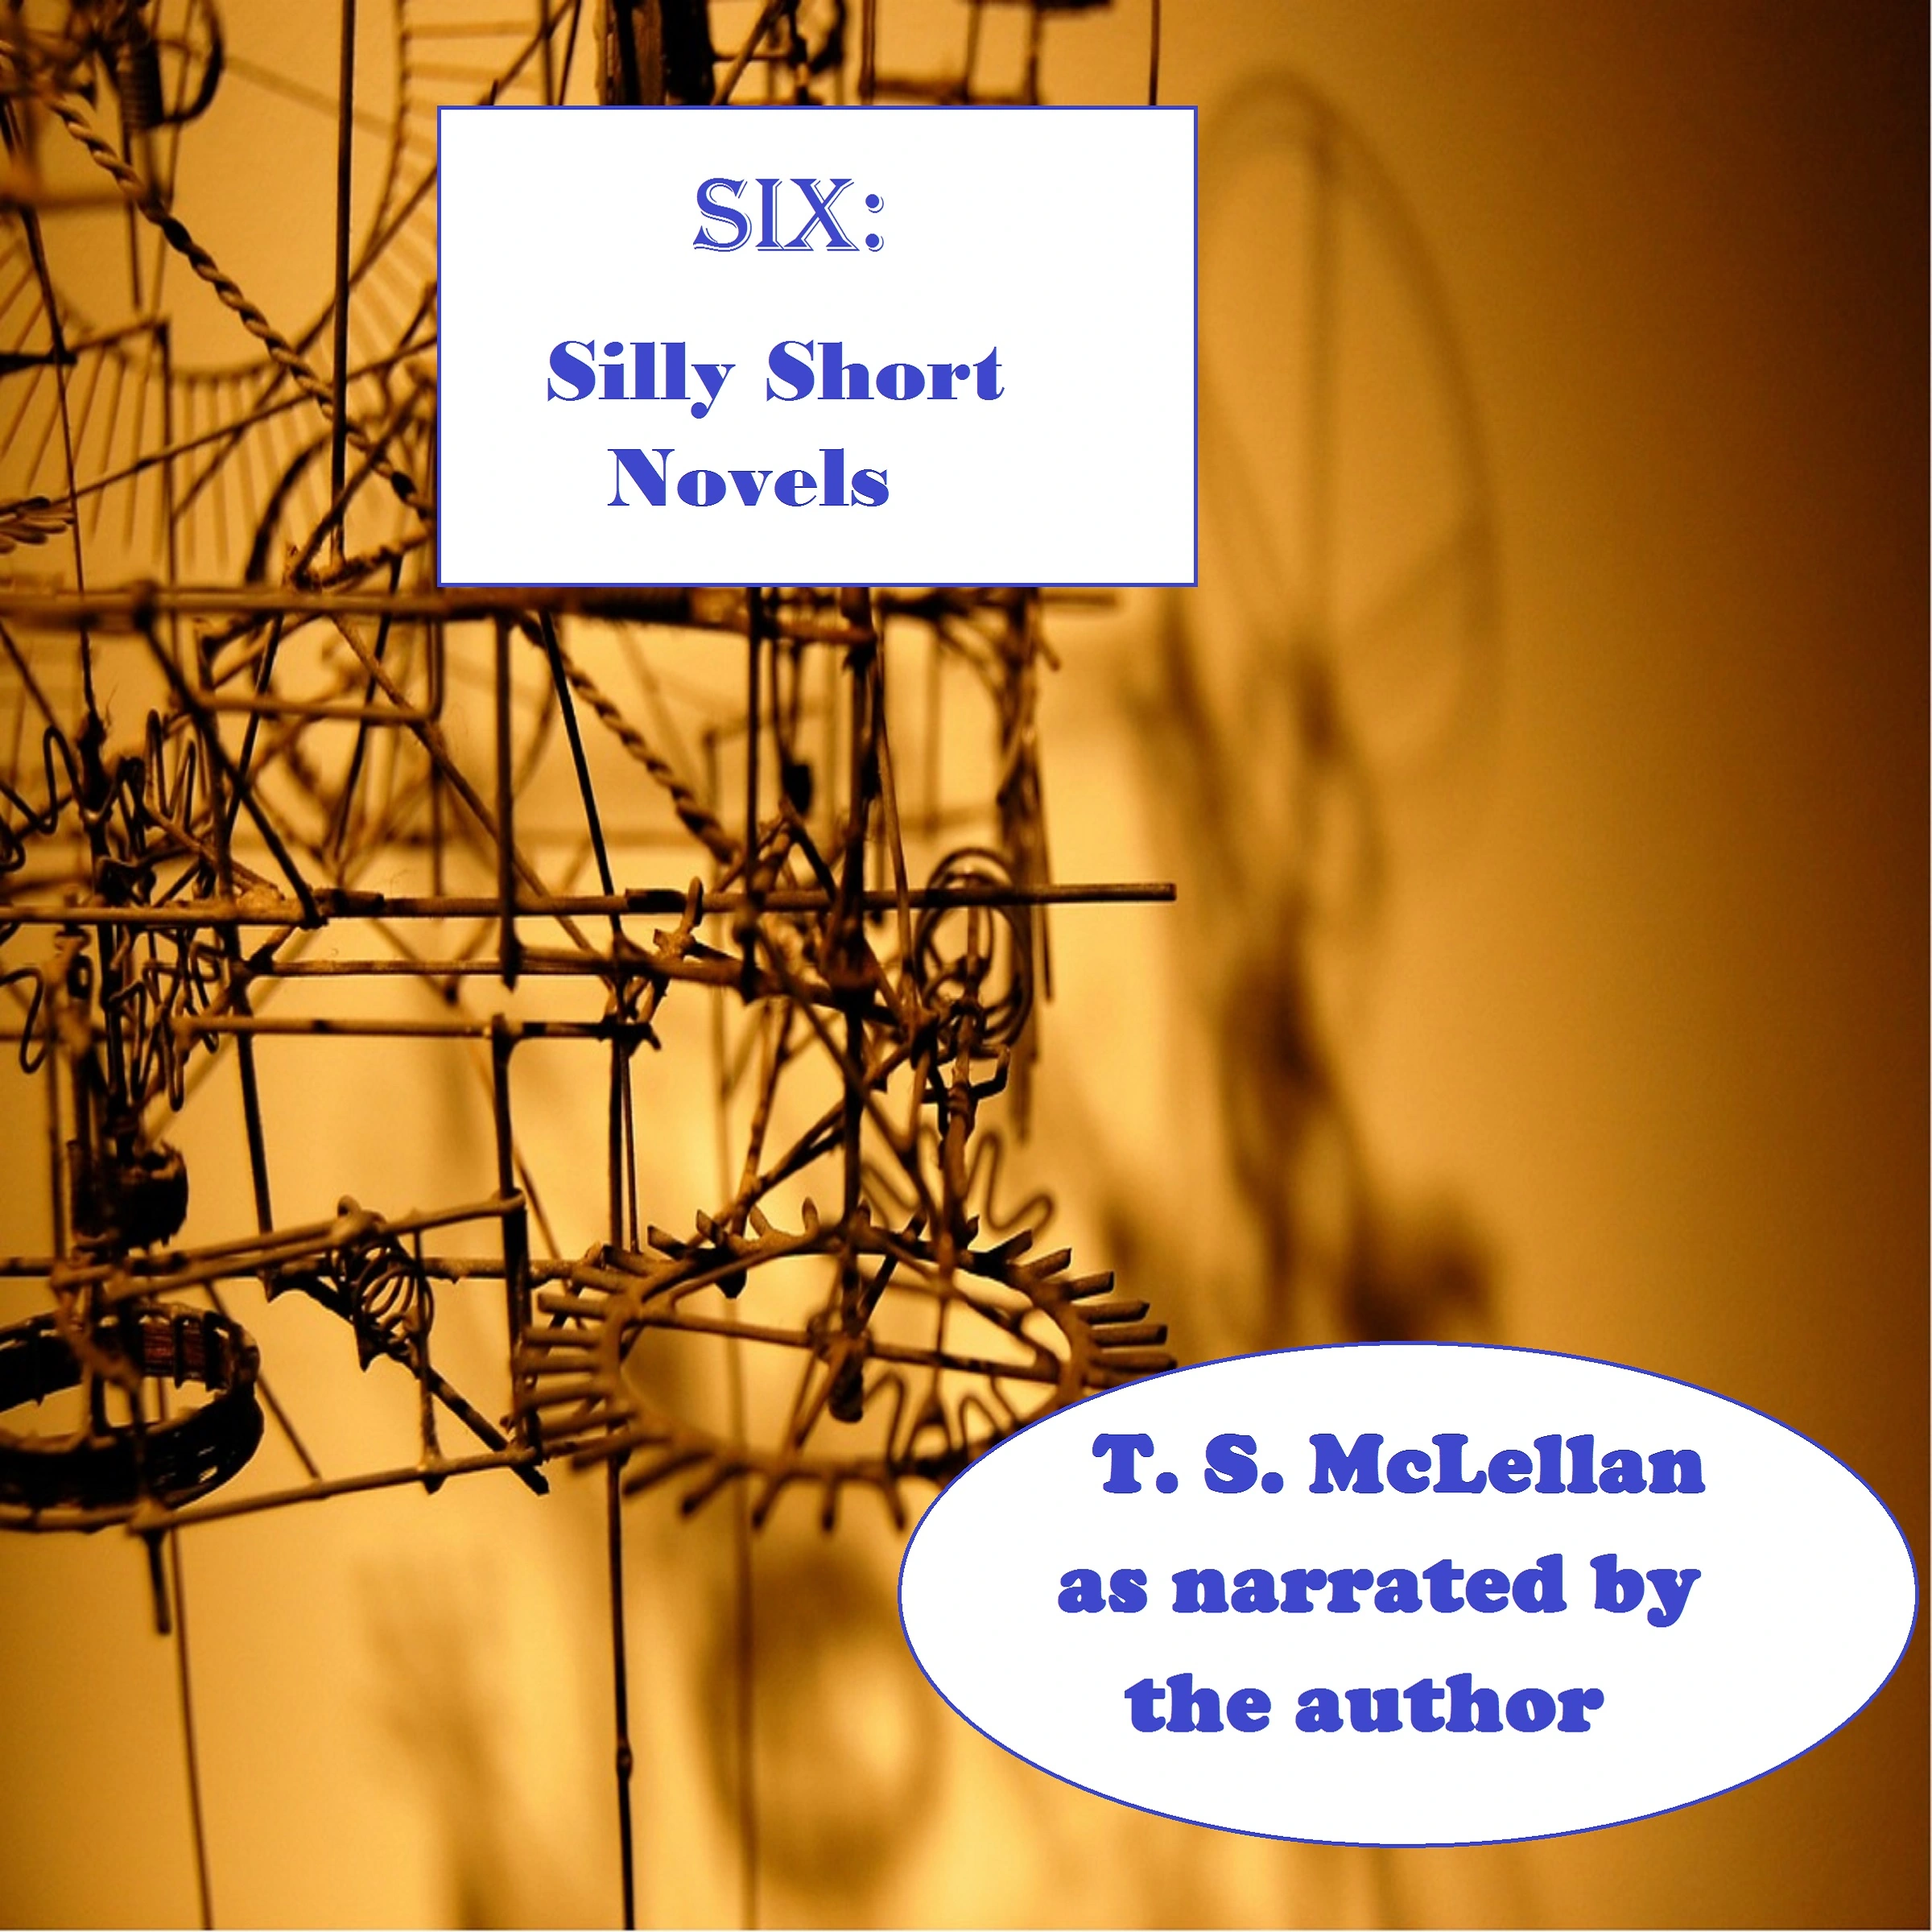 SIX: Silly Short Novels Audiobook by T. S. McLellan